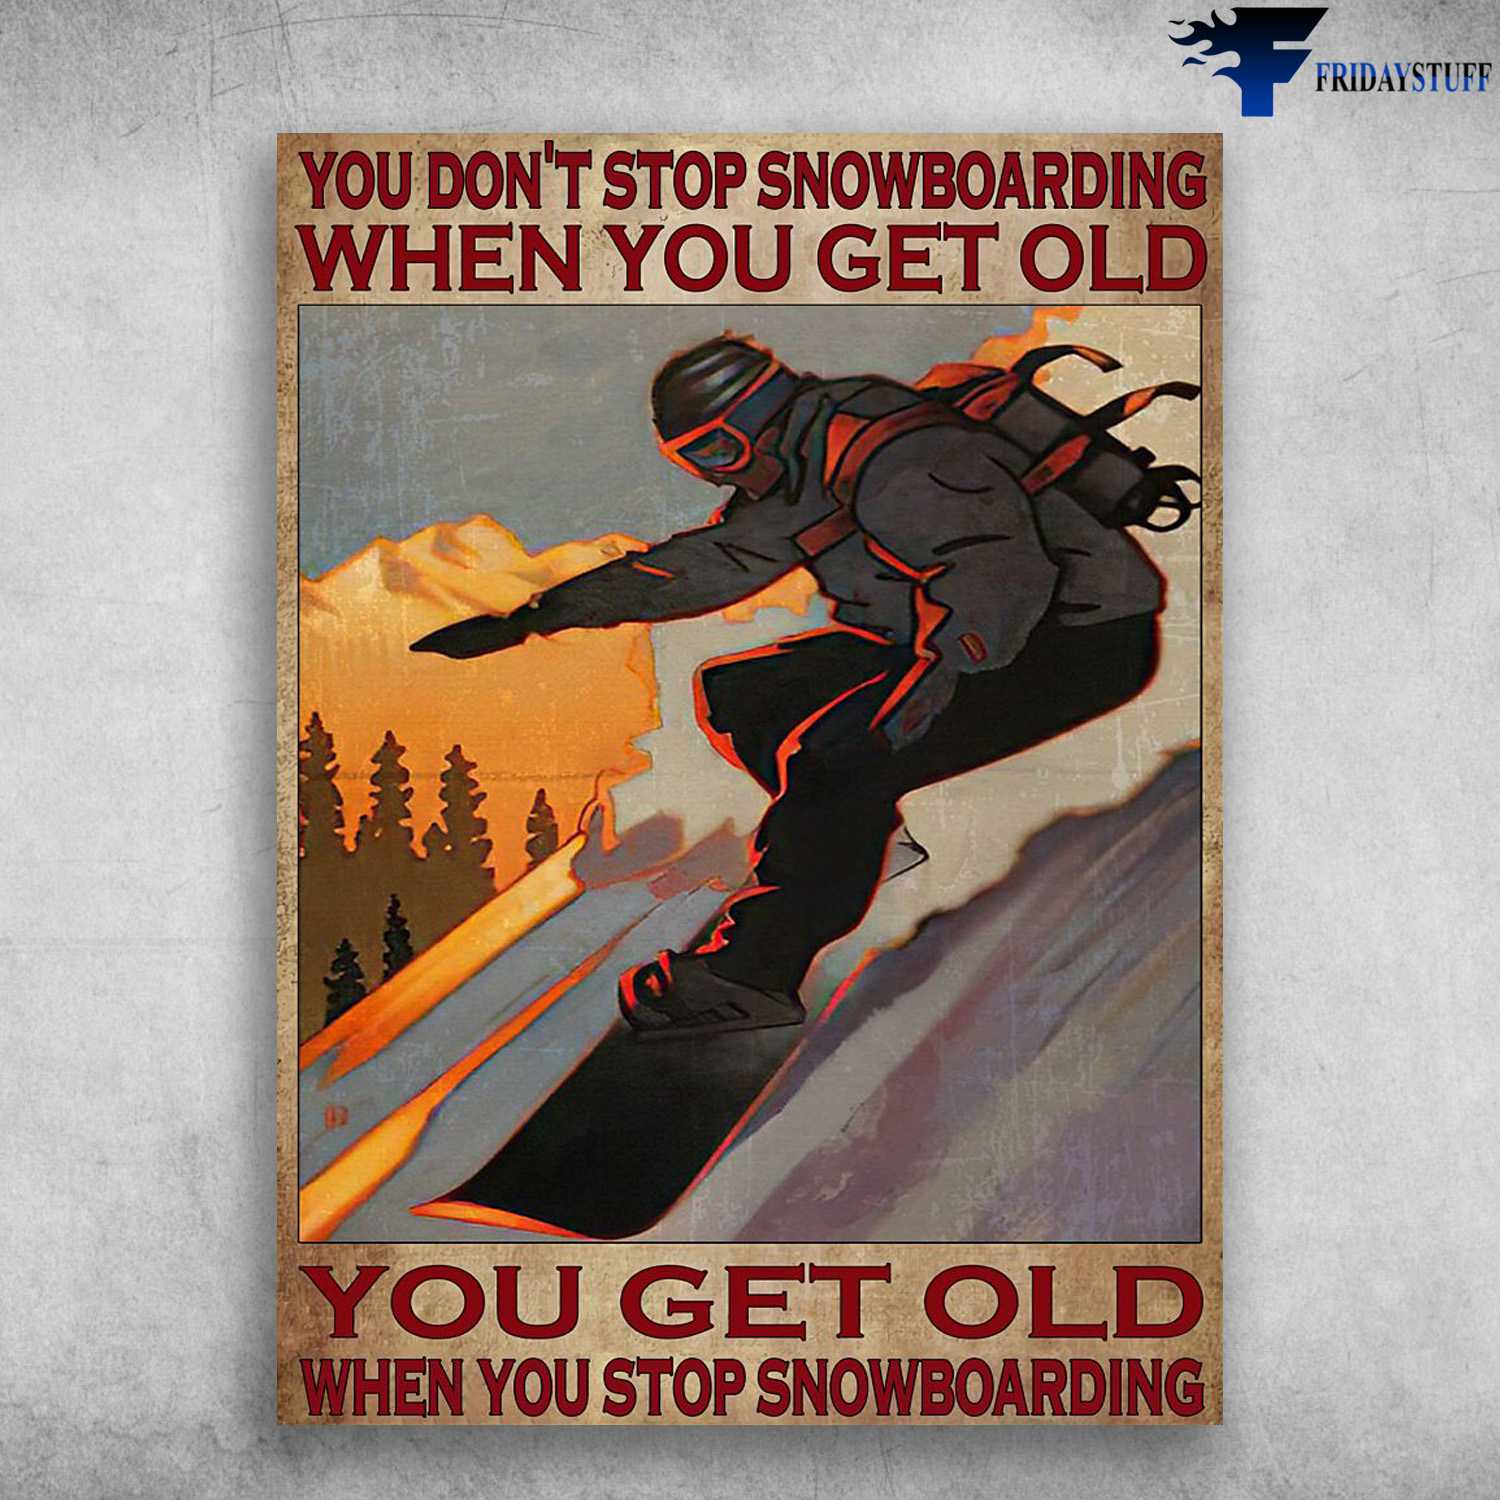 Snowboarding Man, Snowboarding Lover - You Don't Stop Snowboarding, When You Get Old, You Get Old When You Stop Snowboarding